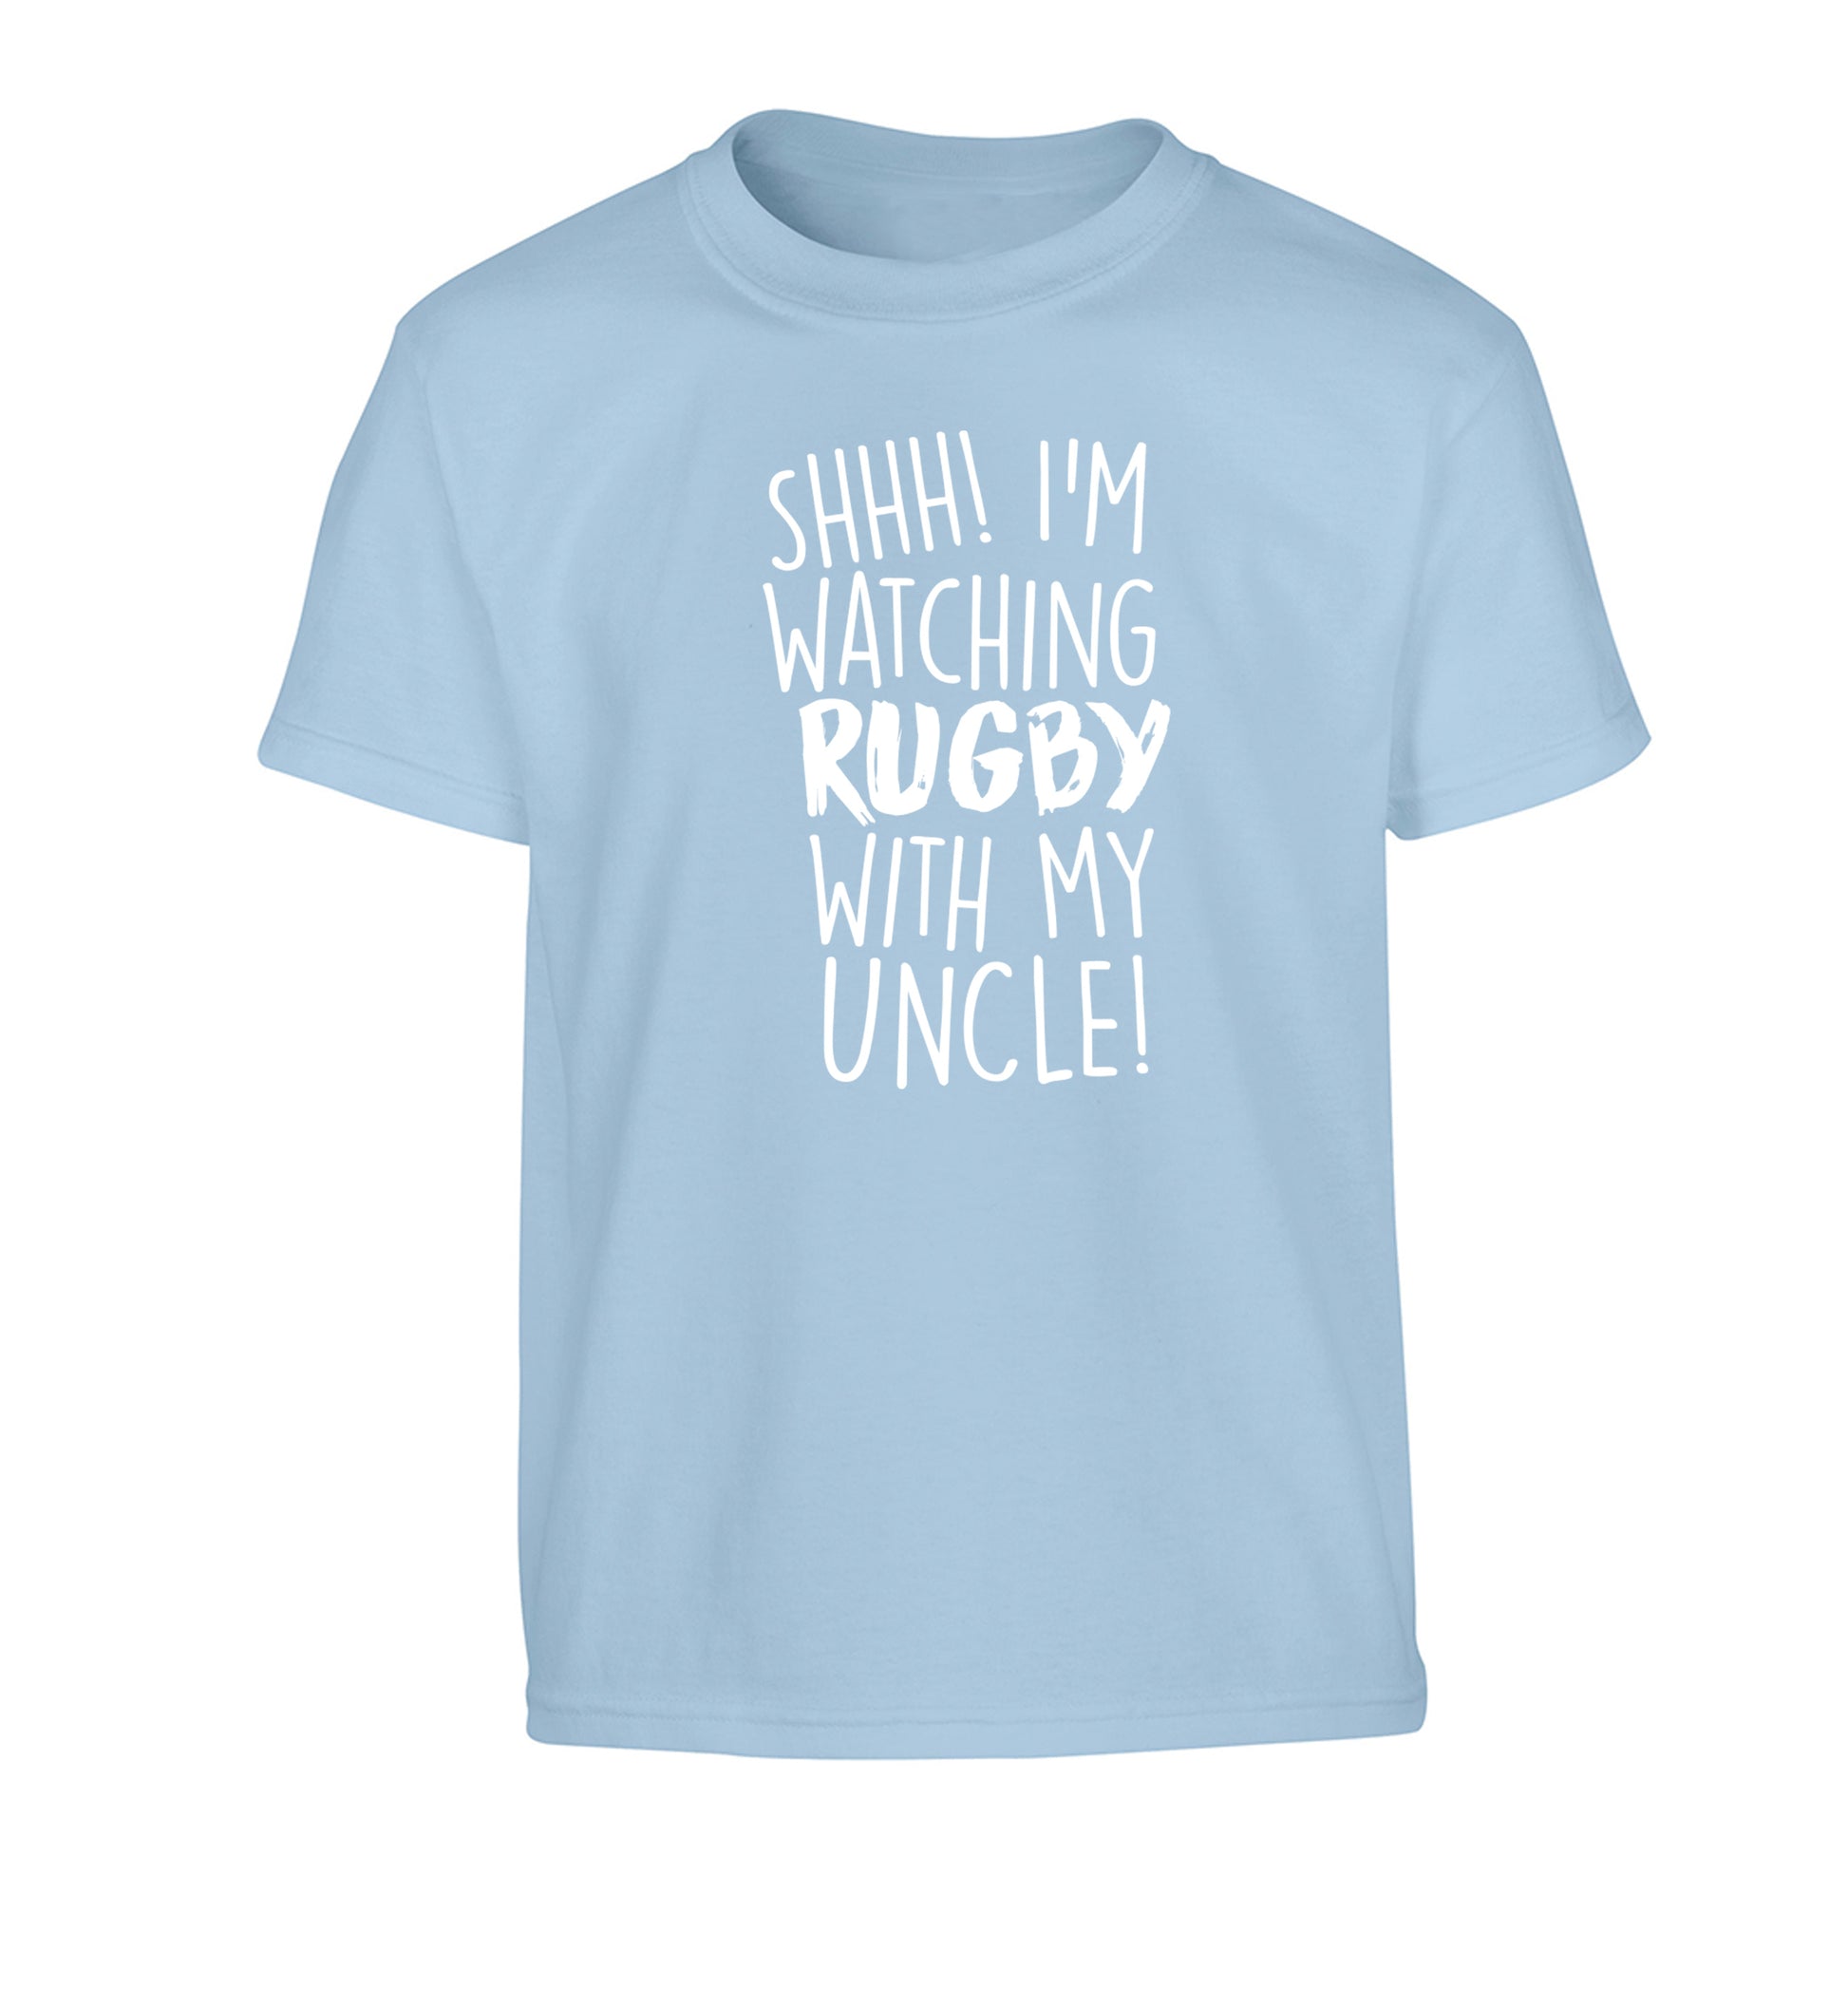 Shh.. I'm watching rugby with my uncle Children's light blue Tshirt 12-13 Years